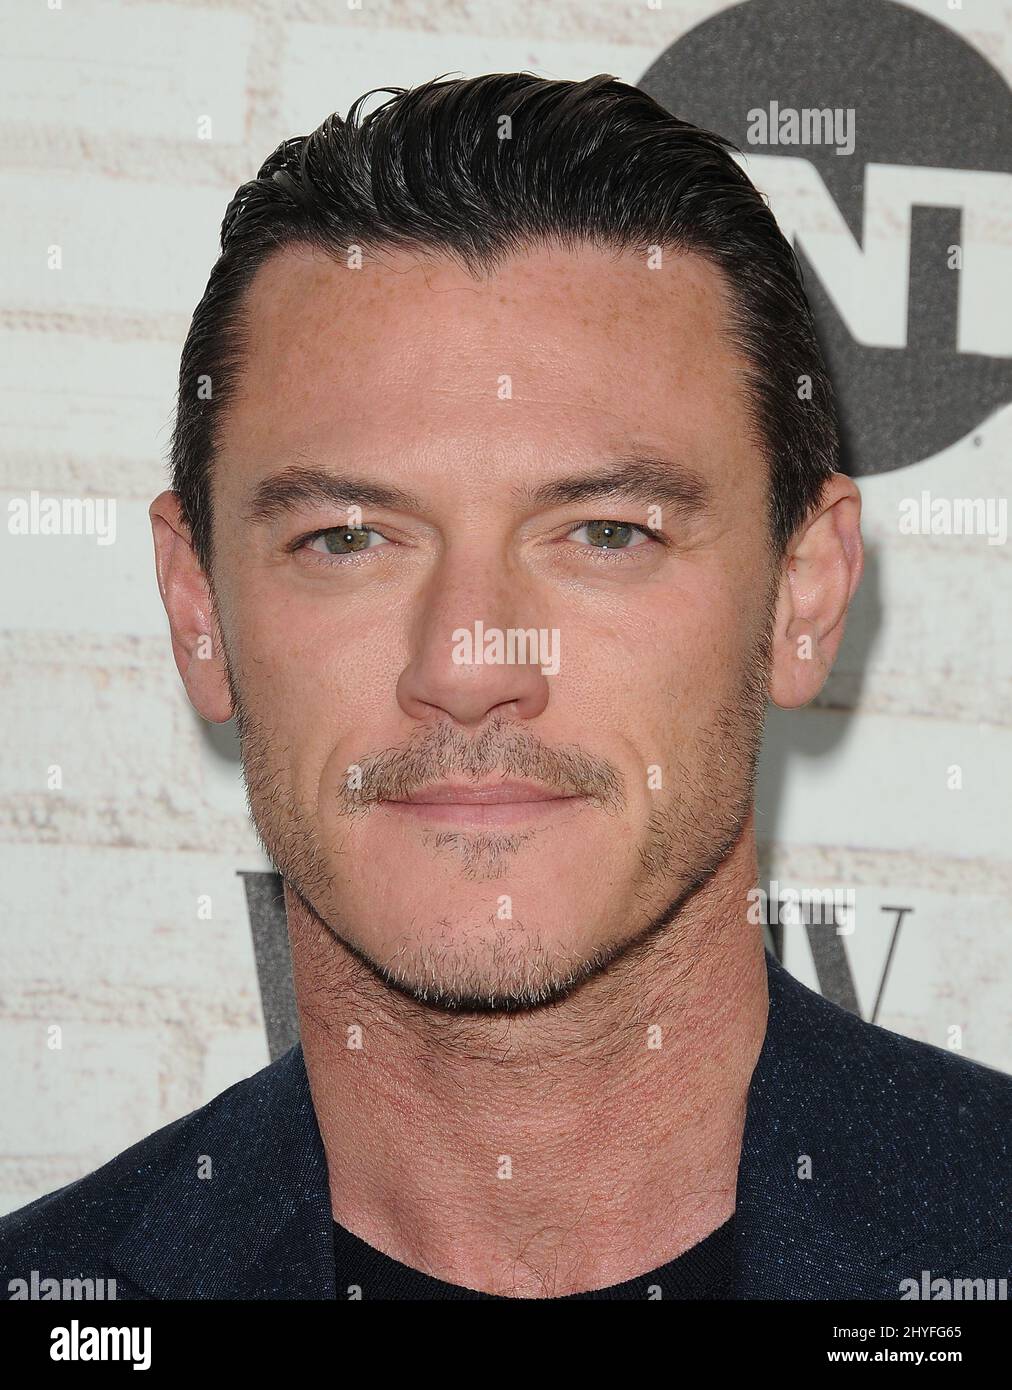 Luke Evans attending the NT's 'The Alienist' FYC event held at the Wallis Annenberg Center, CA on May 23, 2018. Stock Photo